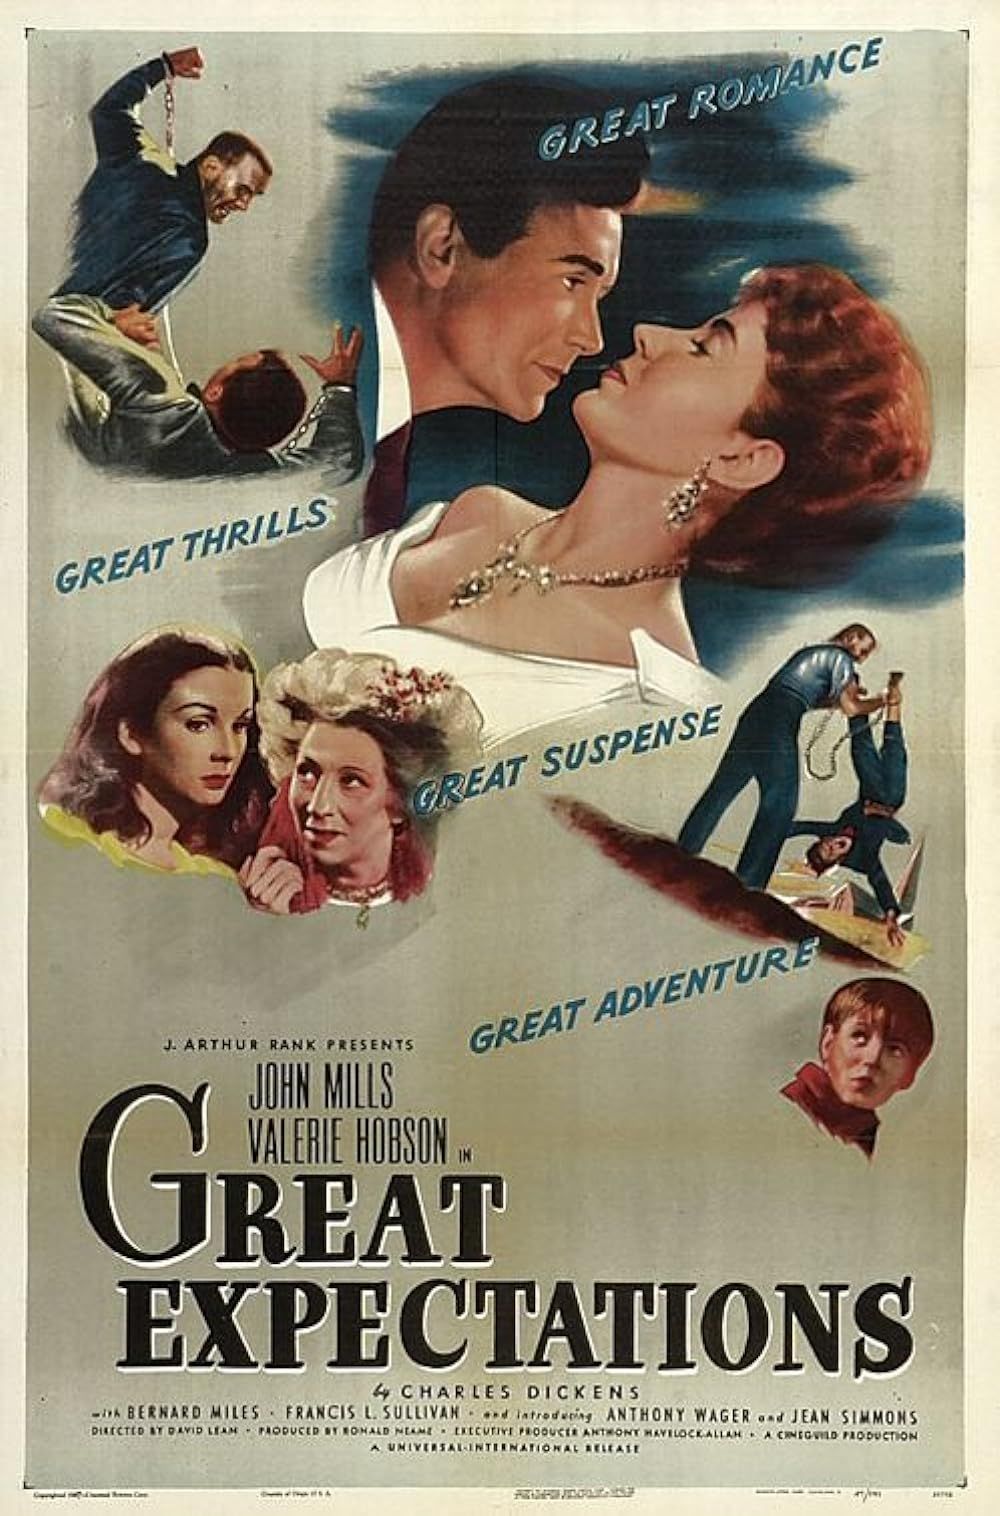 The Cast on the Great Expectations Poster